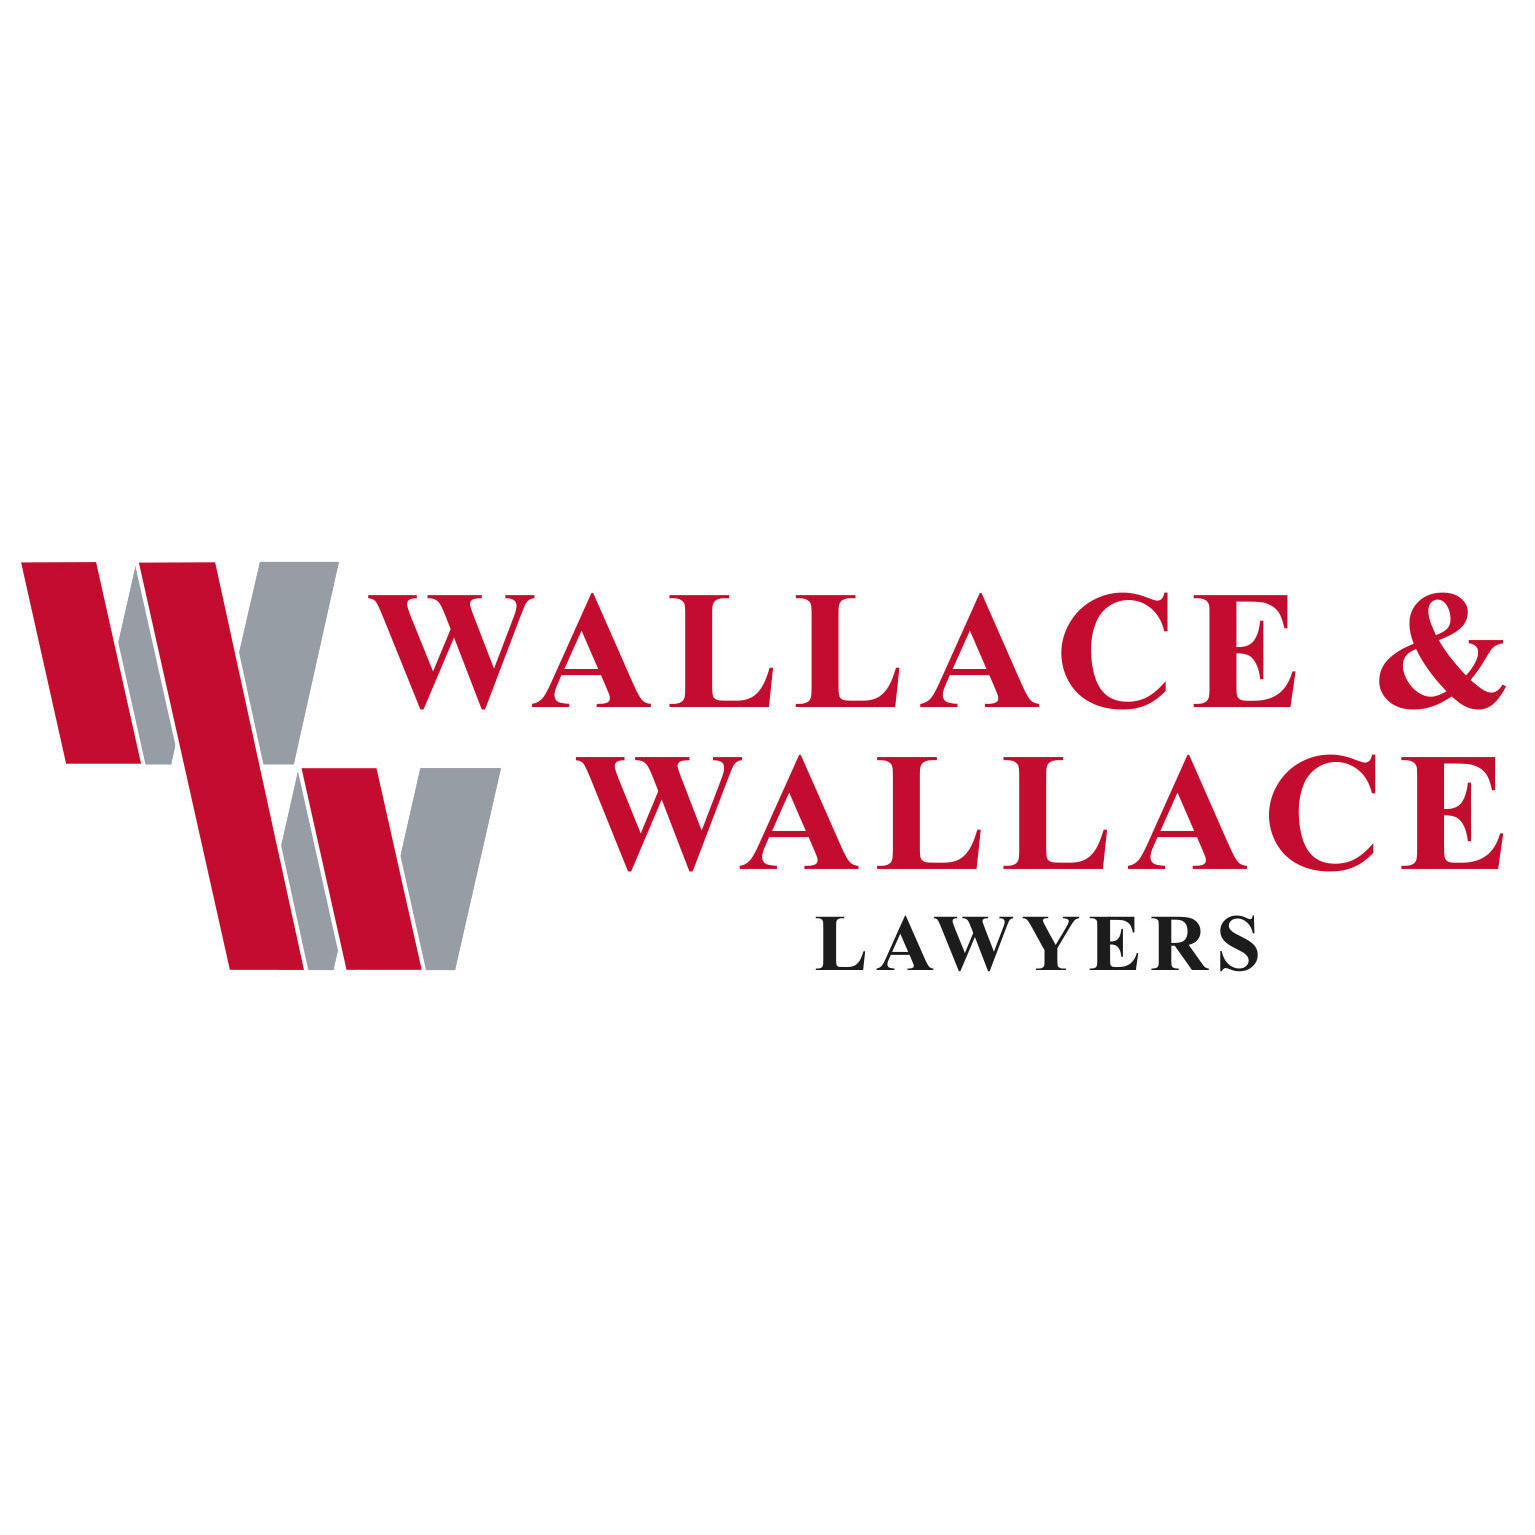 Wallace & Wallace Lawyers - Mackay, QLD 4740 - (07) 4963 2000 | ShowMeLocal.com